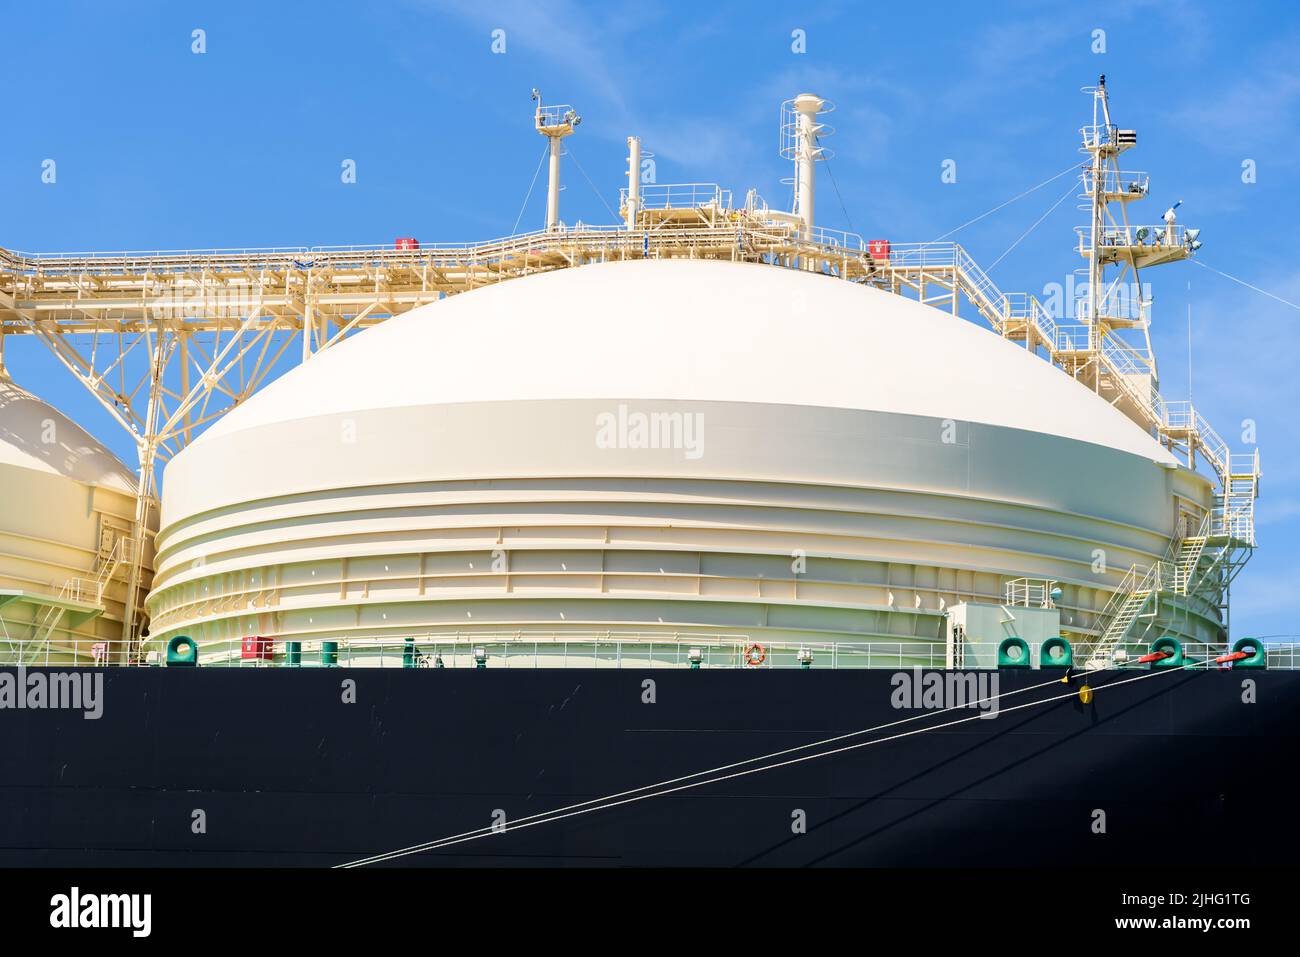 Detail of a large gas tank of a LNG carrier ship on a clear summer day Stock Photo